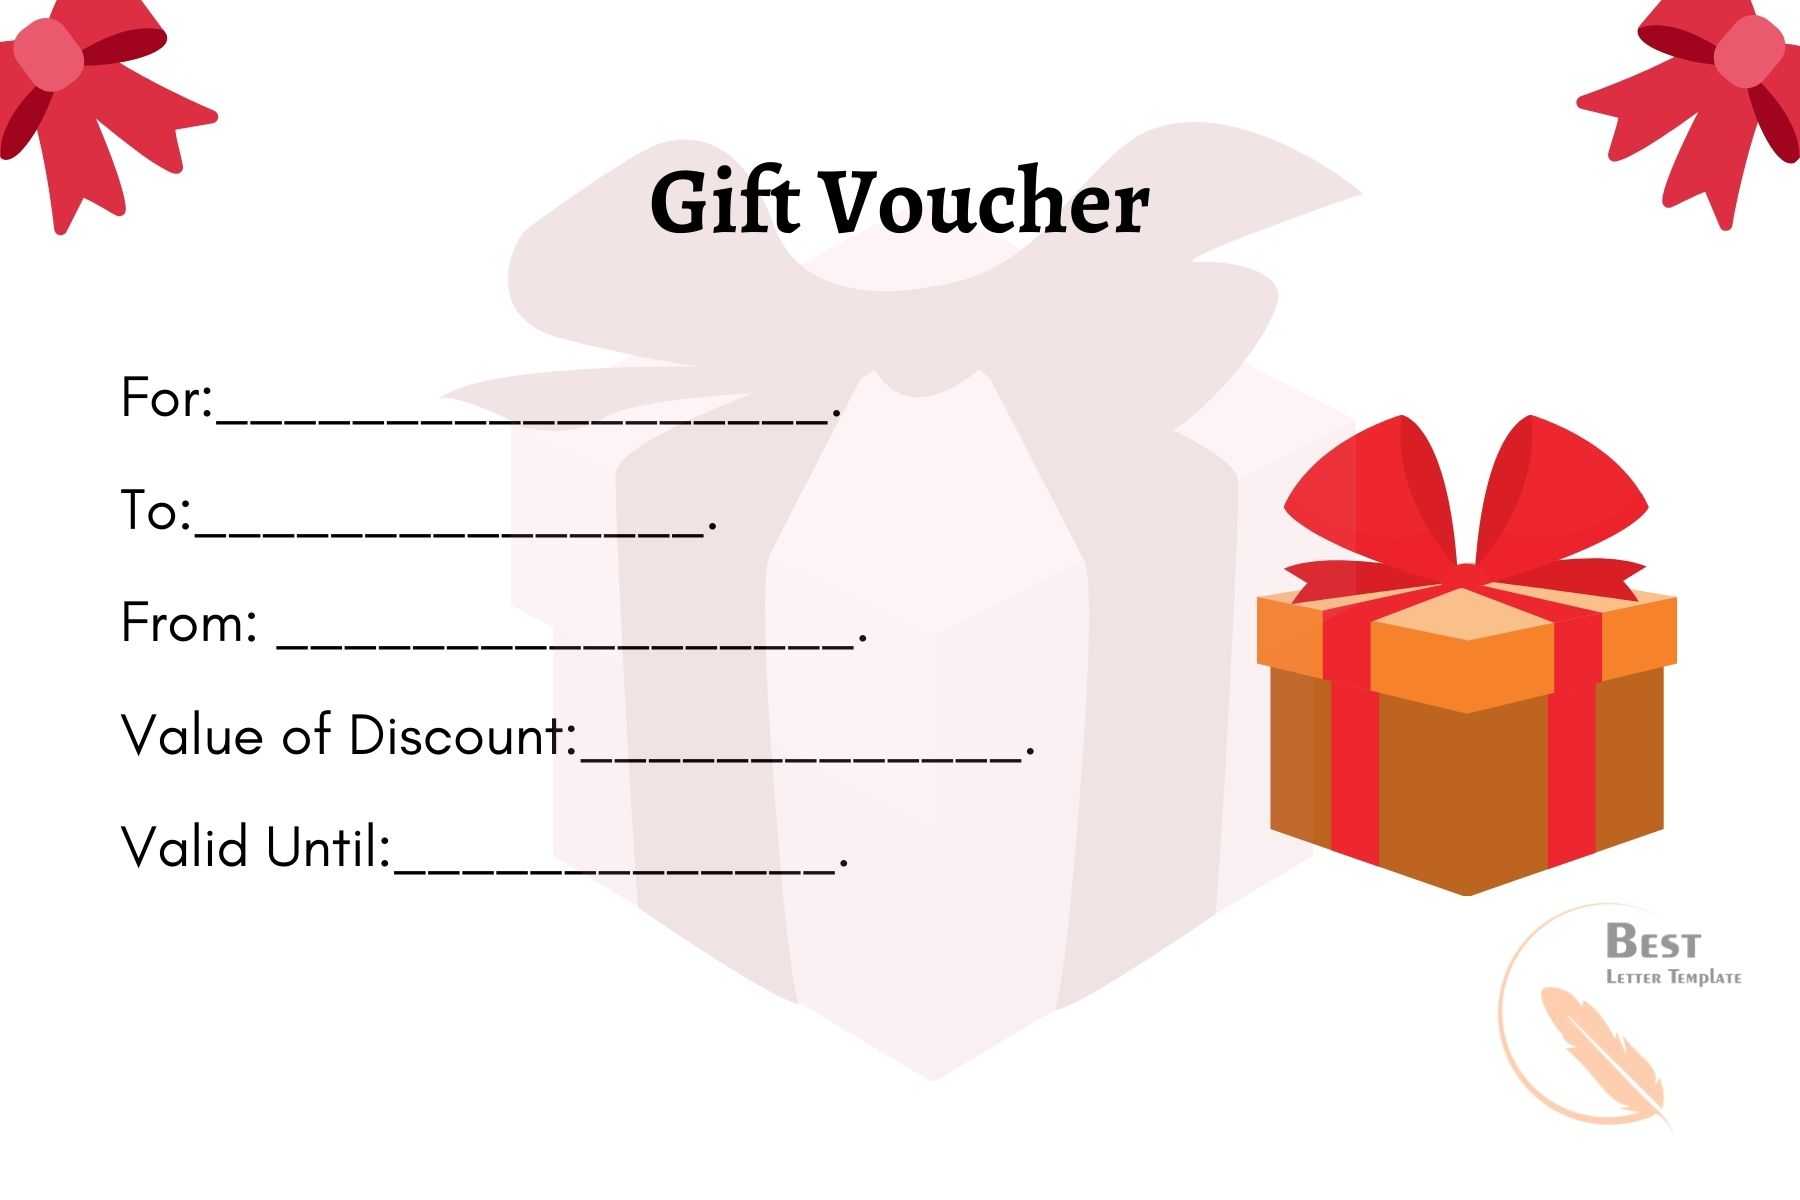 printable-gift-voucher-design-business-gift-coupon-editable-gift-my